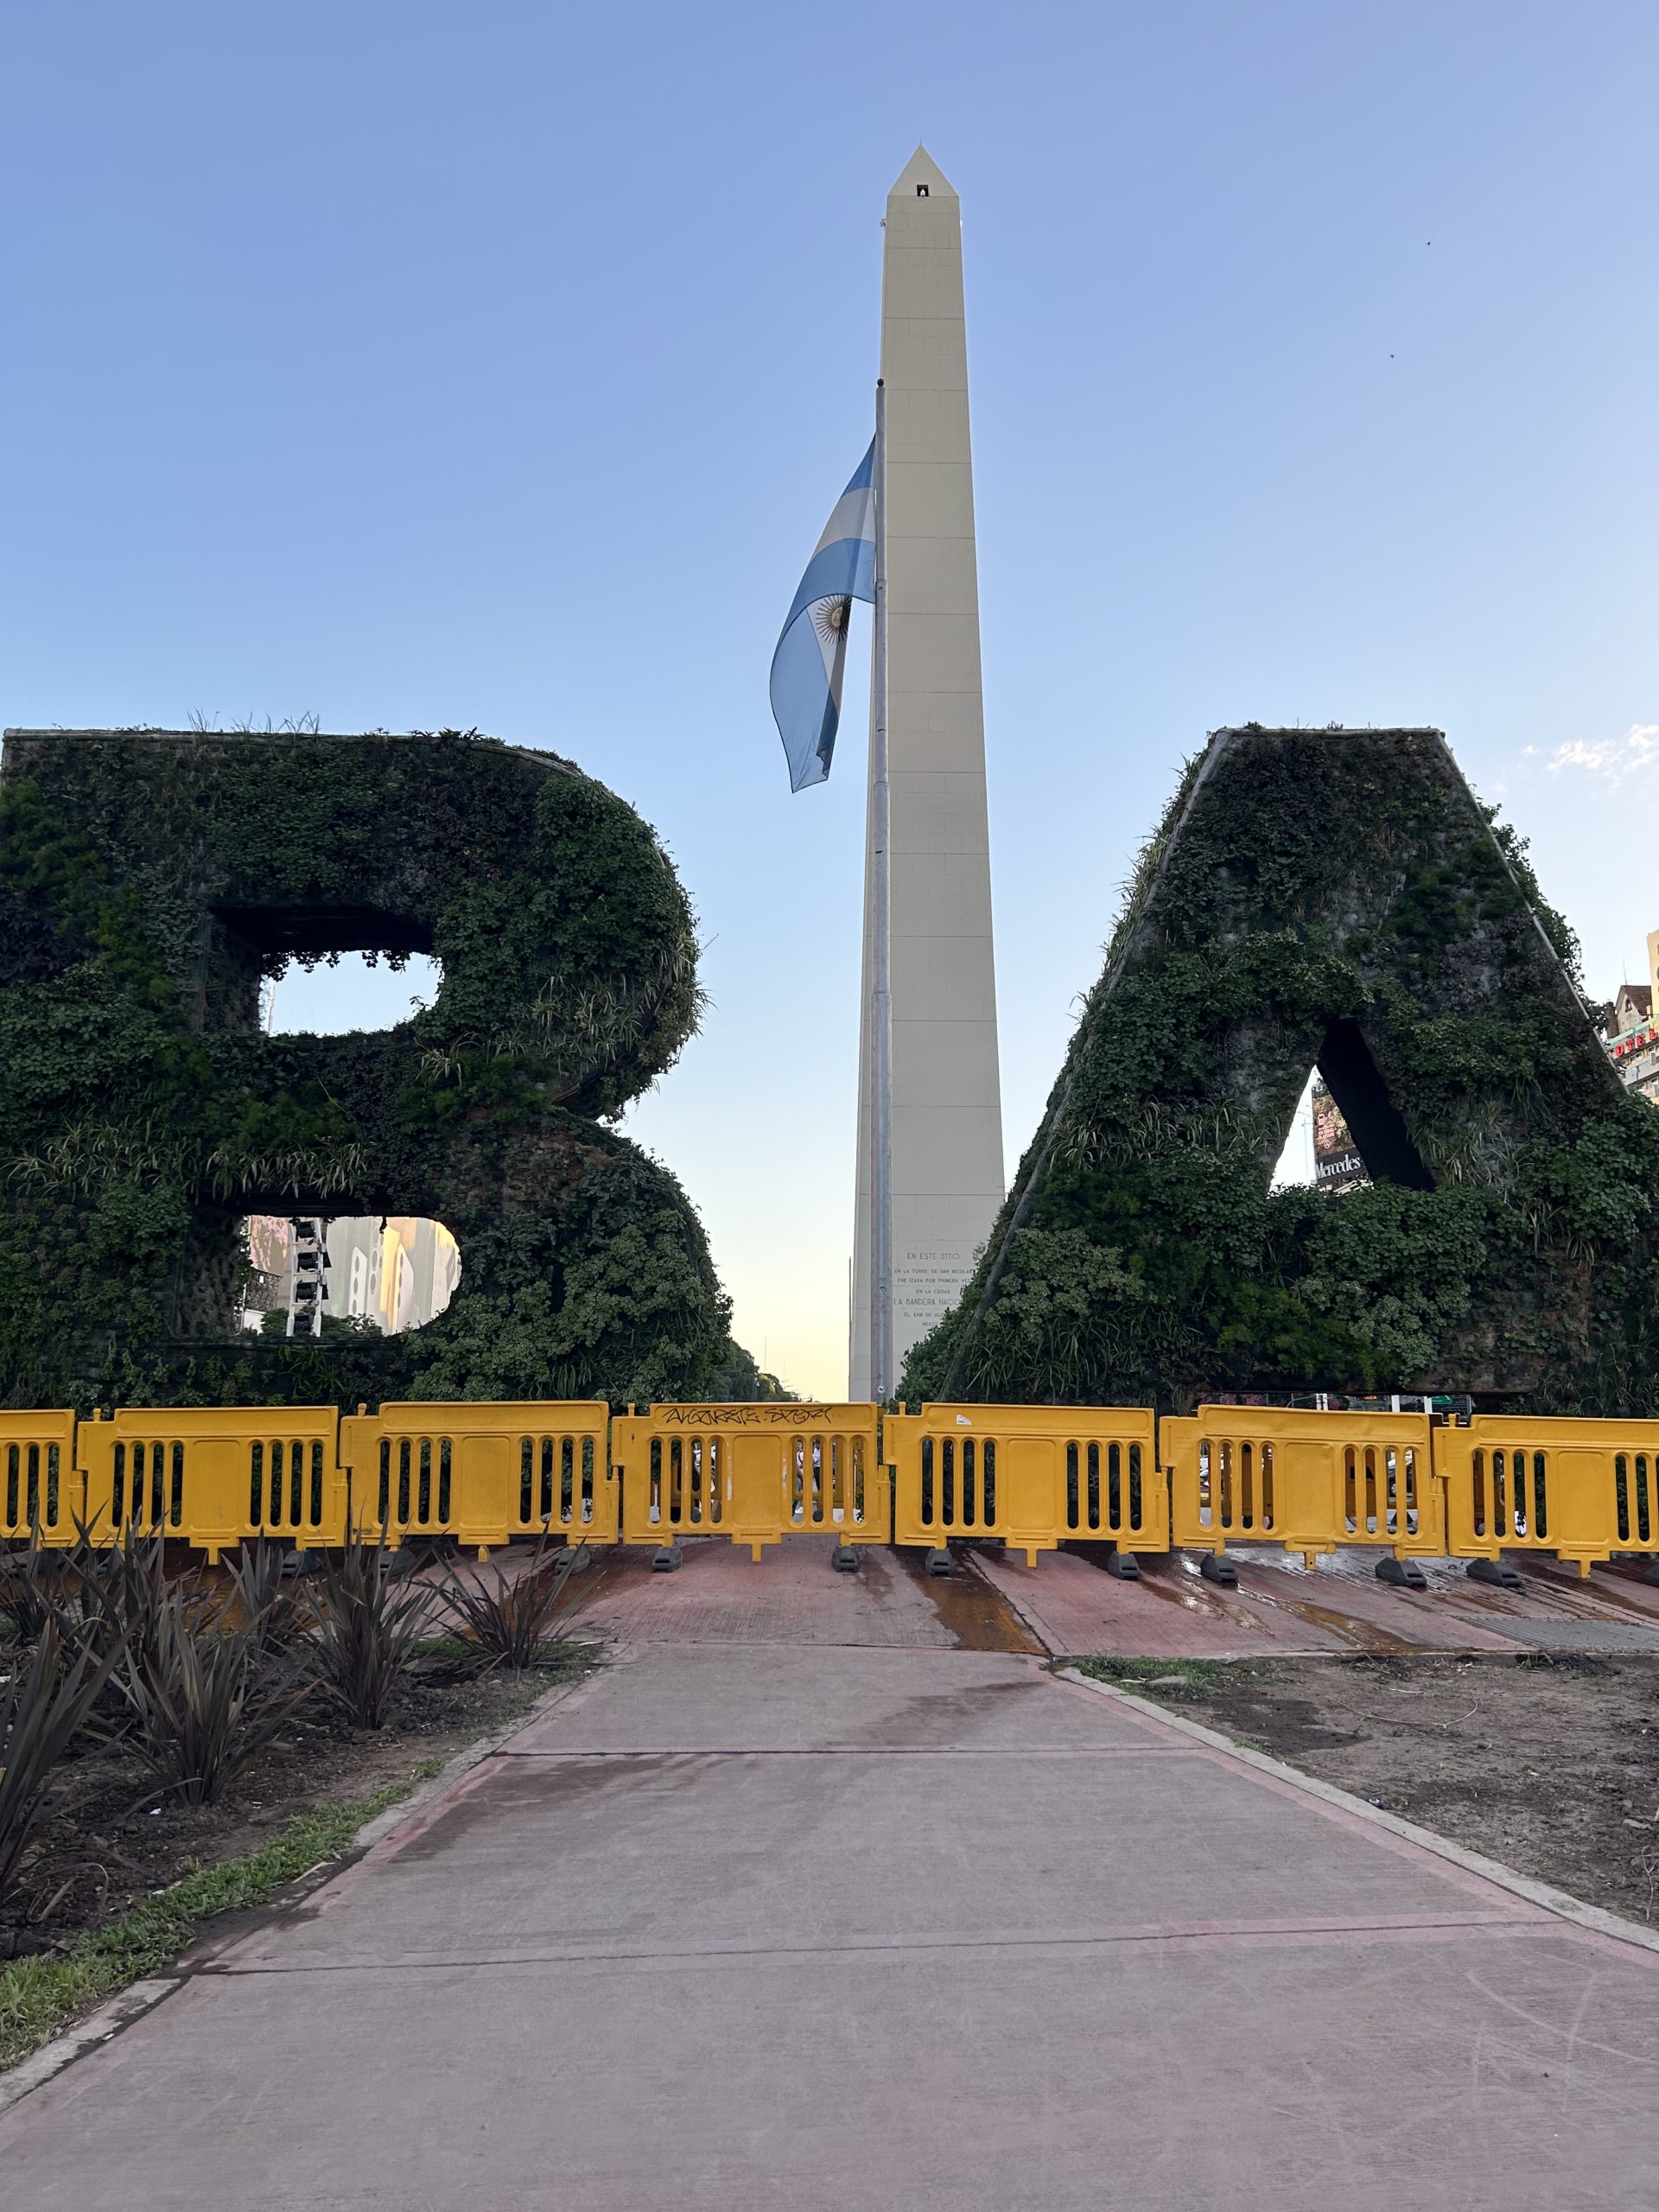 the Obelisk, national historic monument, behind the letters BA